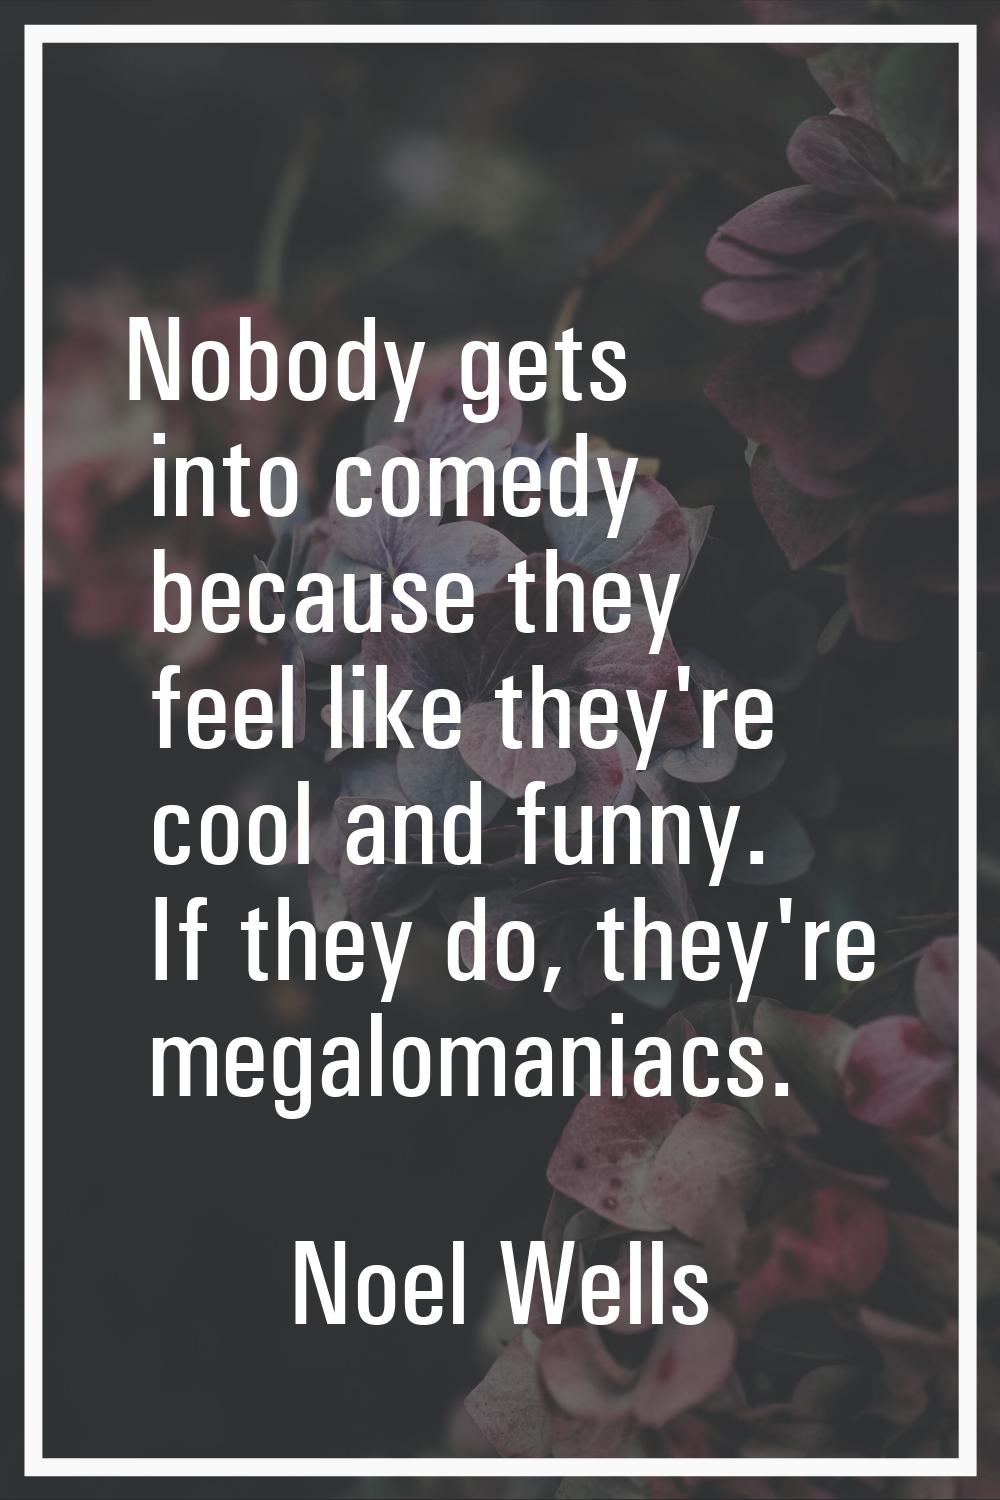 Nobody gets into comedy because they feel like they're cool and funny. If they do, they're megaloma